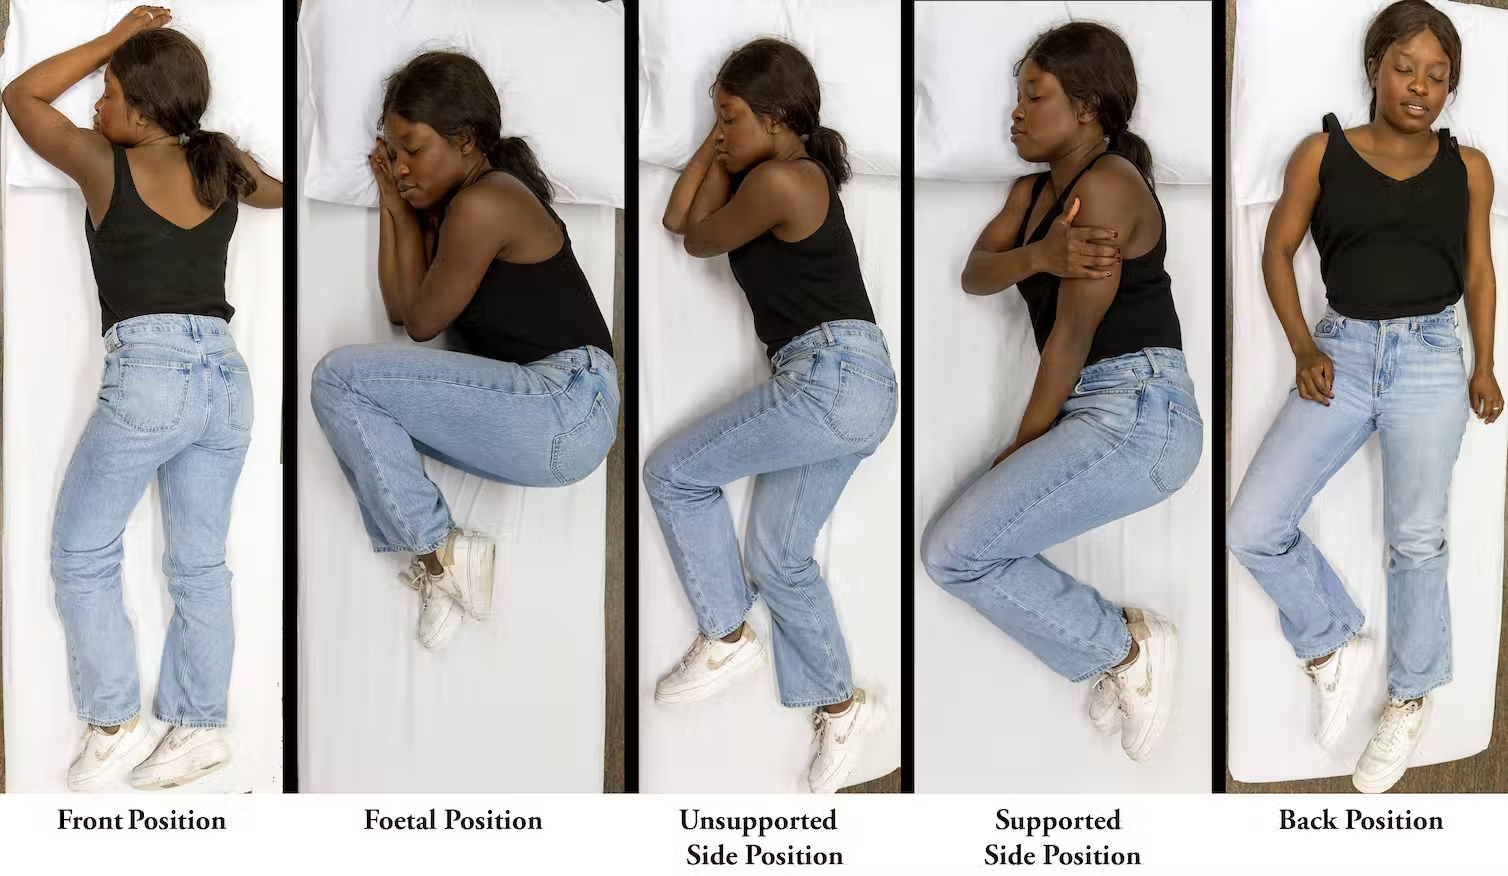 Five side by side photos show a young woman in a black singlet and jeans, captured from above, in different sleeping positions